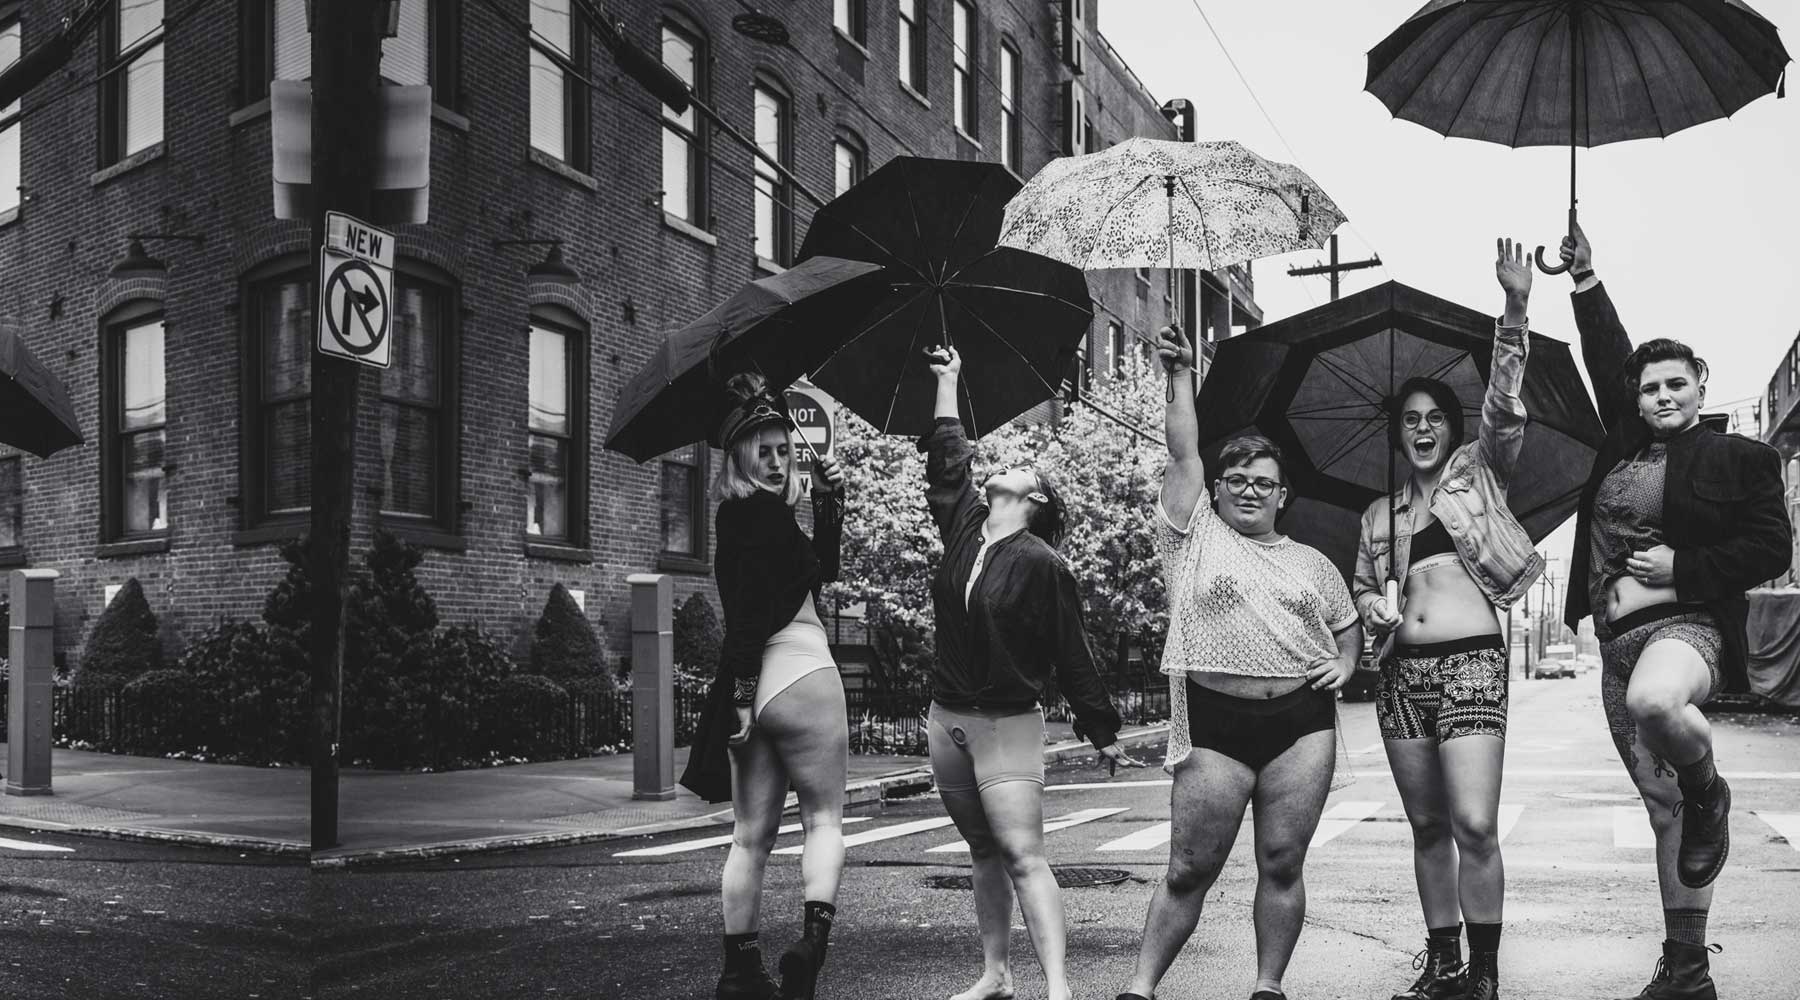 5 people in the street holding umbrellas